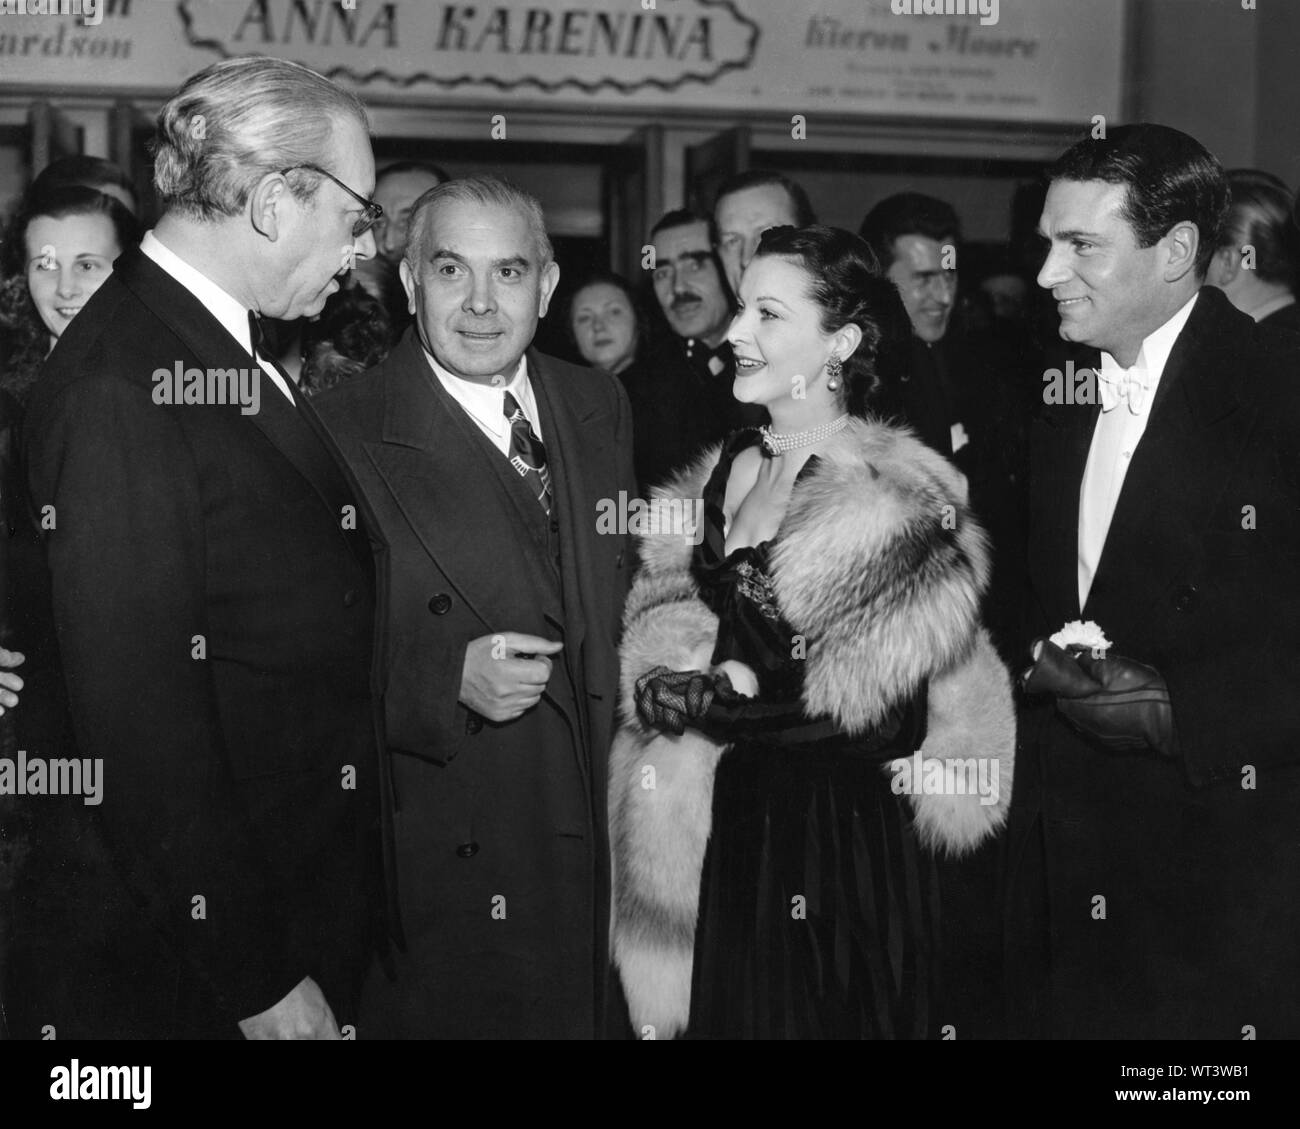 Producer ALEXANDER KORDA director JULIEN DUVIVIER star VIVIEN LEIGH and  LAURENCE OLIVIER at the premiere of ANNA KARENINA 22nd January 1948  Leicester Square Theatre London Stock Photo - Alamy